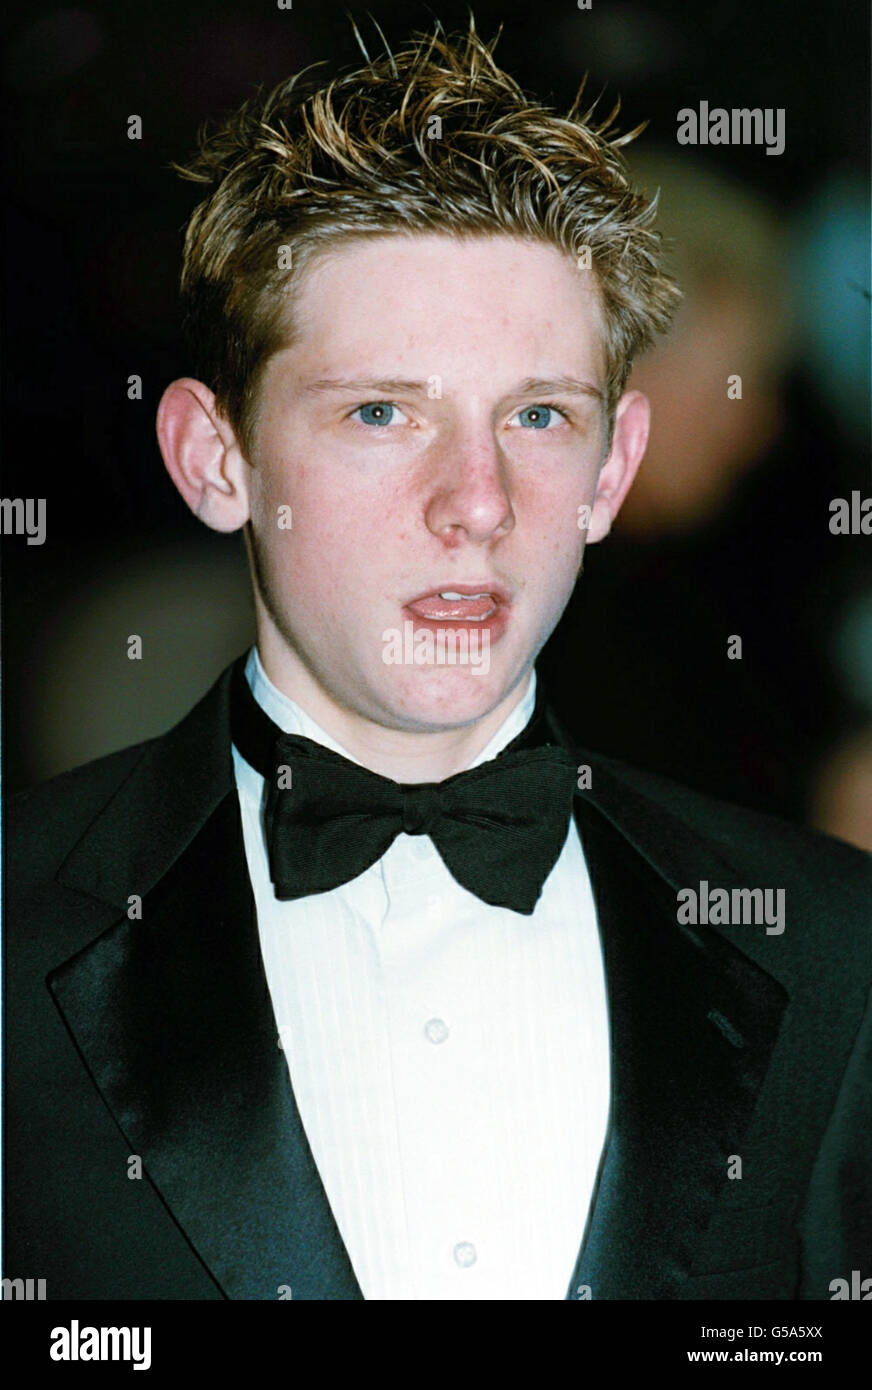 Billy Elliott actor Jamie Bell during The Orange British Academy Film Awards at the Odeon in London's Leicester Square. The ceremony has been brought forward several weeks from previous years to give it a more prominent position in the film calendar. Stock Photo